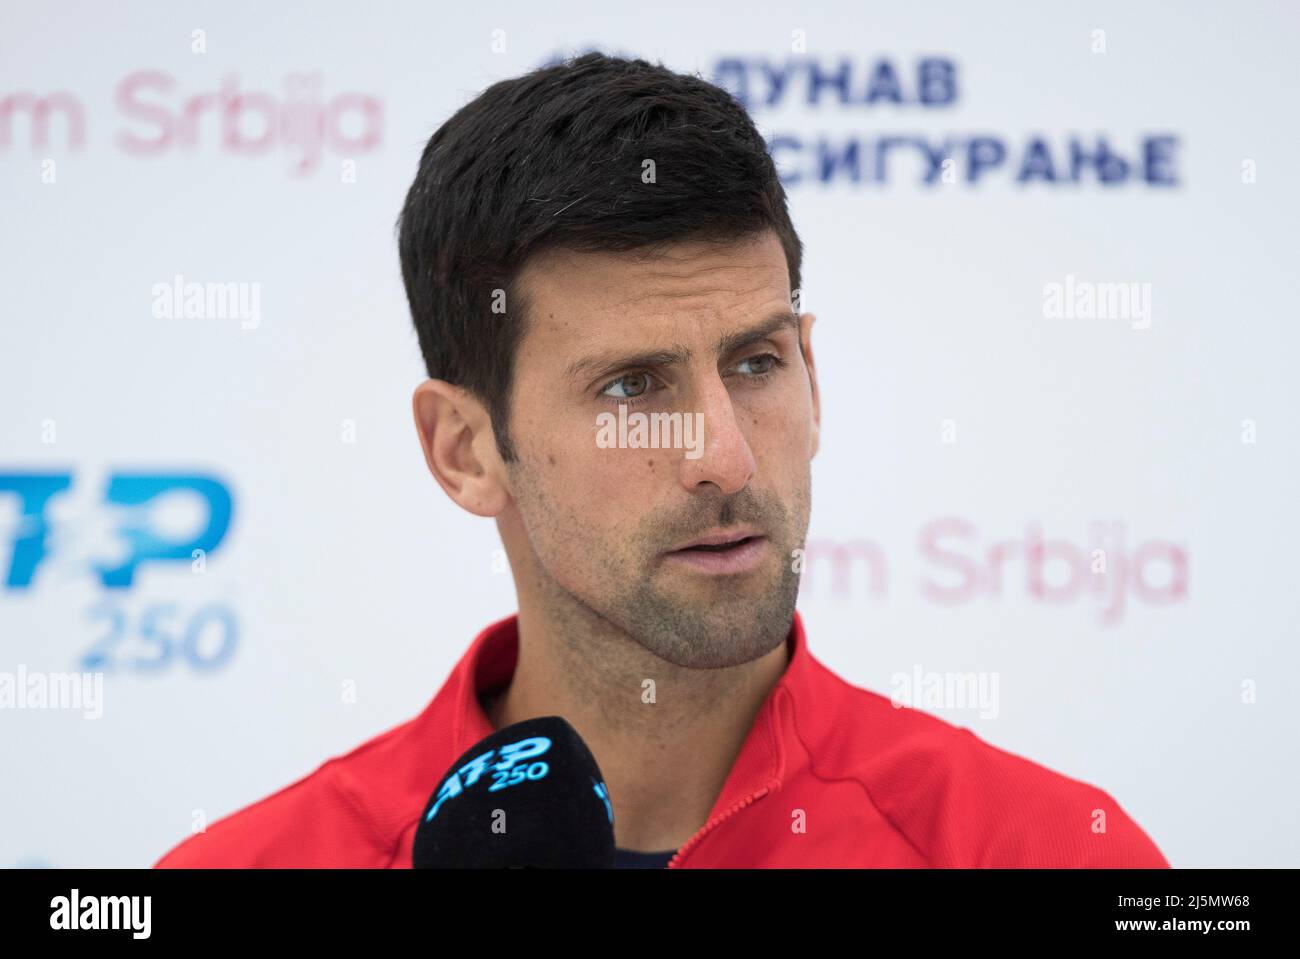 Belgrade, Serbia, 23th April 2022. Novak Djokovic of Serbia reacts during the interview after the match during the day six of Serbia Open ATP 250 Tournament at Novak Tennis Centre in Belgrade, Serbia. April 23, 2022. Credit: Nikola Krstic/Alamy Stock Photo